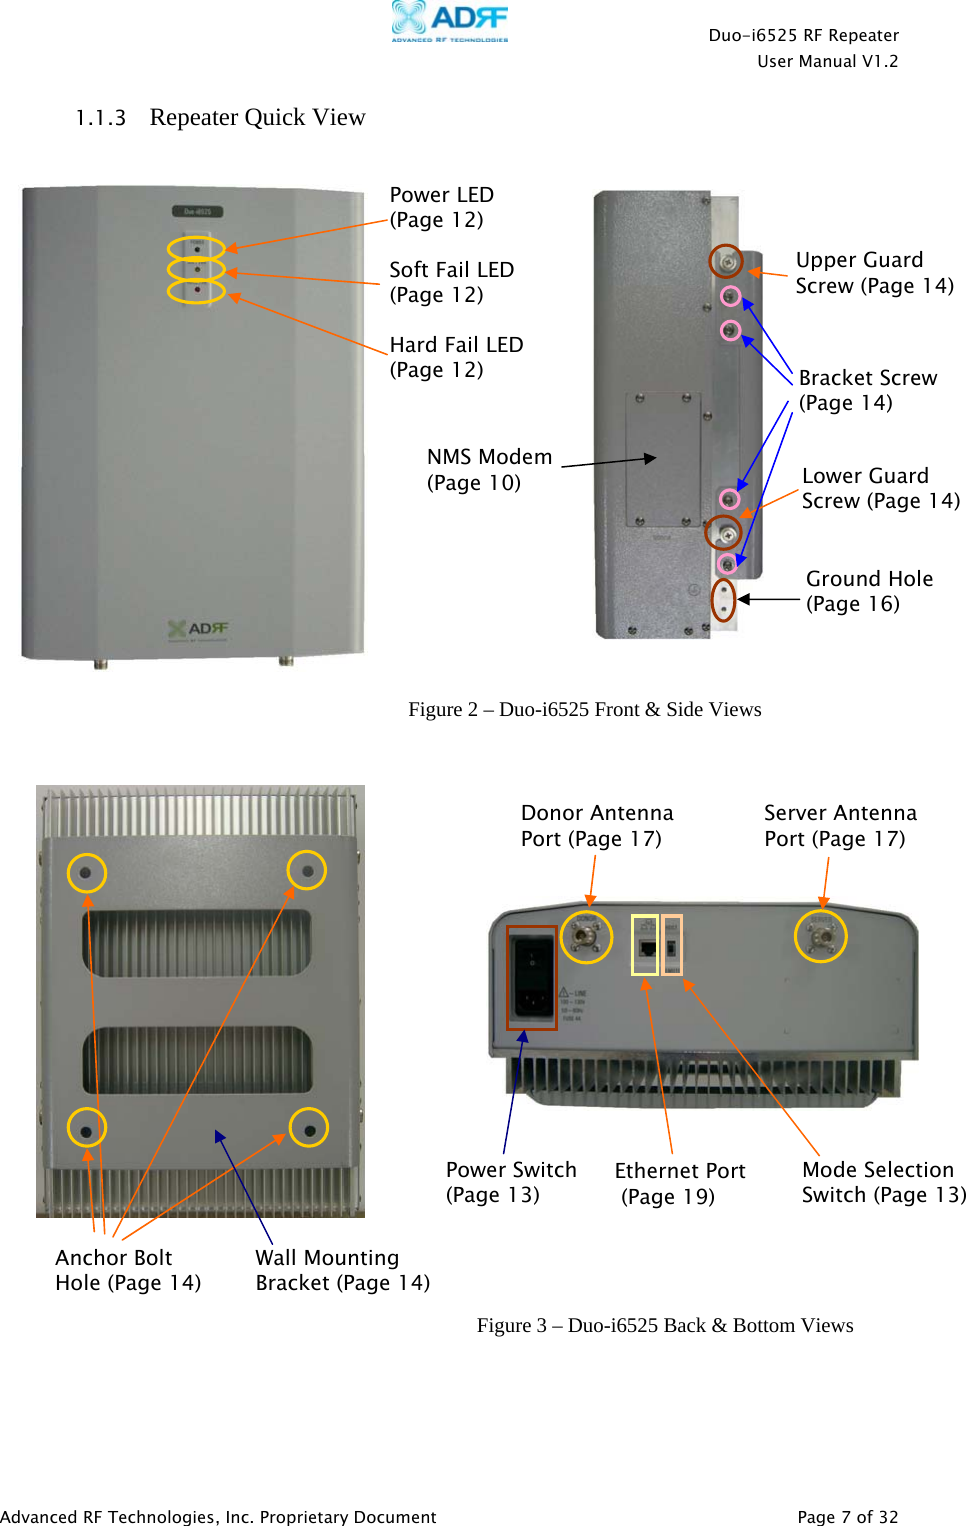    Duo-i6525 RF Repeater  User Manual V1.2  Advanced RF Technologies, Inc. Proprietary Document   Page 7 of 32  1.1.3 Repeater Quick View    Power LED (Page 12) Upper Guard Screw (Page 14) NMS Modem (Page 10) Anchor Bolt Hole (Page 14) Power Switch (Page 13) Mode Selection Switch (Page 13) Donor Antenna Port (Page 17) Server Antenna Port (Page 17) Wall Mounting  Bracket (Page 14) Soft Fail LED (Page 12) Hard Fail LED (Page 12)  Bracket Screw (Page 14) Ground Hole (Page 16) Lower Guard  Screw (Page 14) Ethernet Port  (Page 19) Figure 2 – Duo-i6525 Front &amp; Side Views Figure 3 – Duo-i6525 Back &amp; Bottom Views 